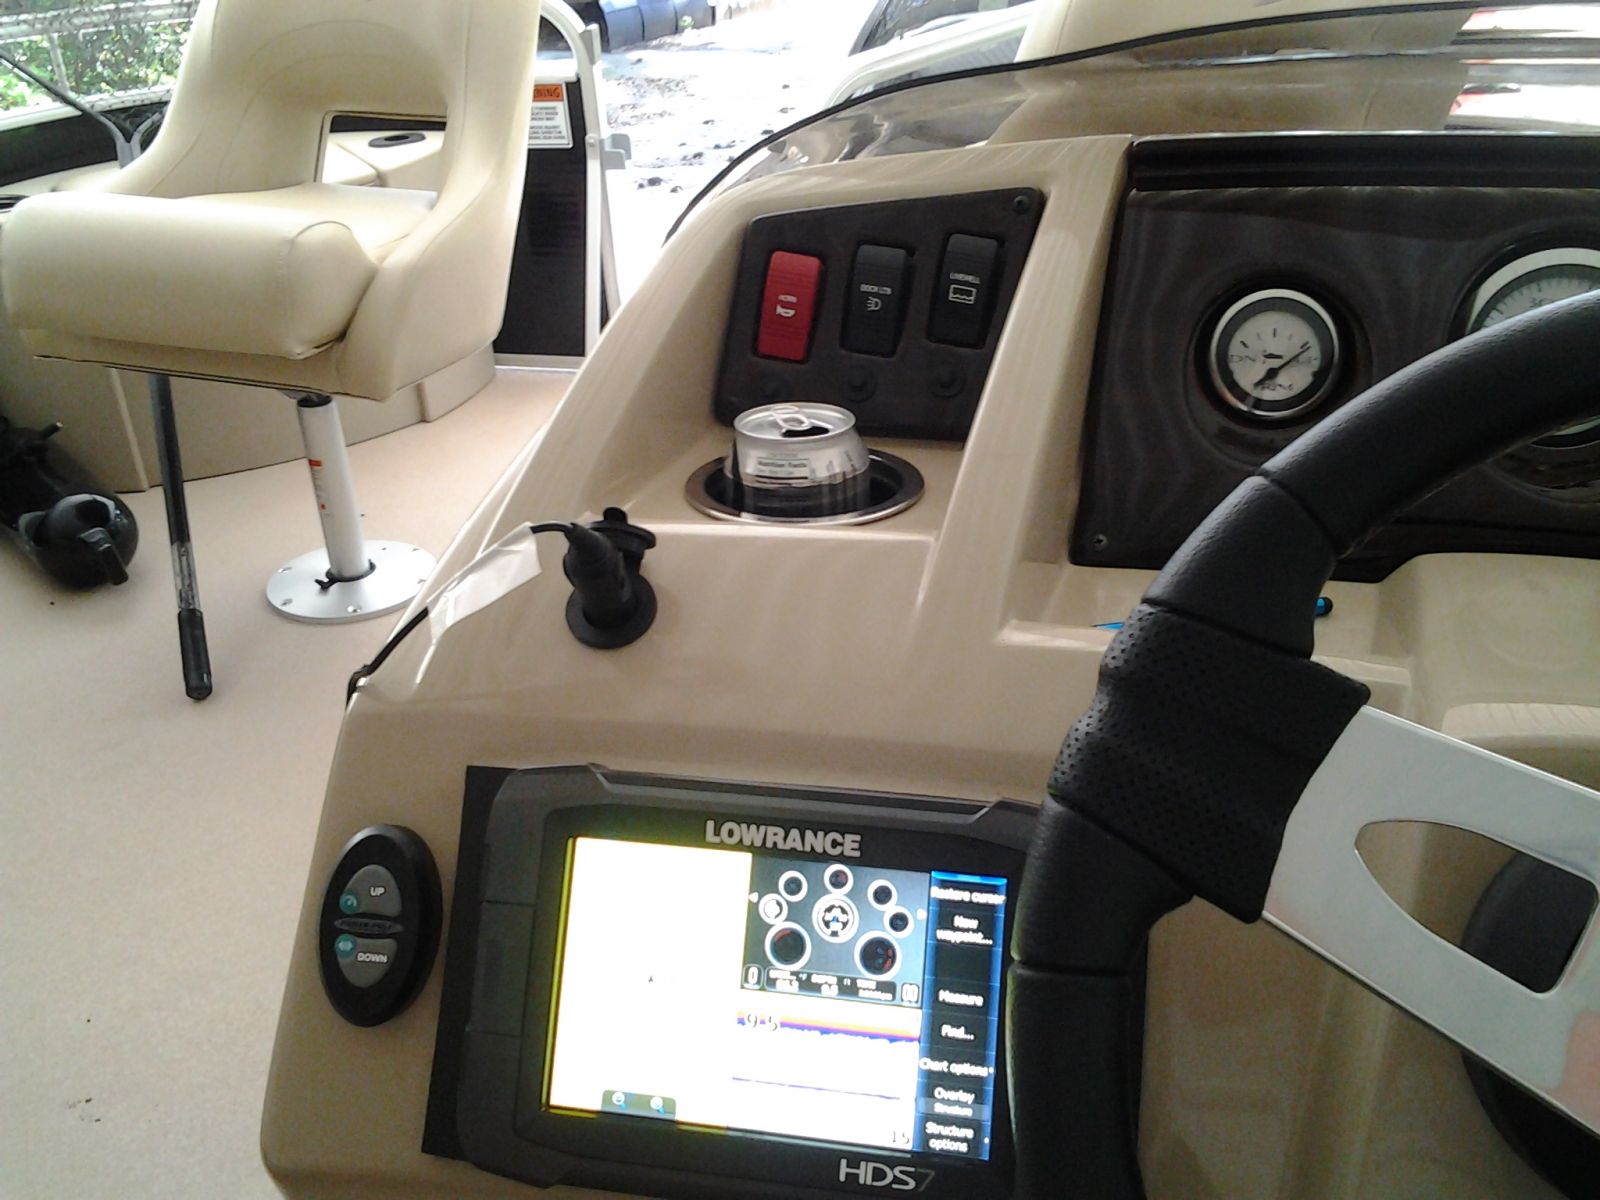 Mounted Lowrance HDS 7 Touchscreen in the dash